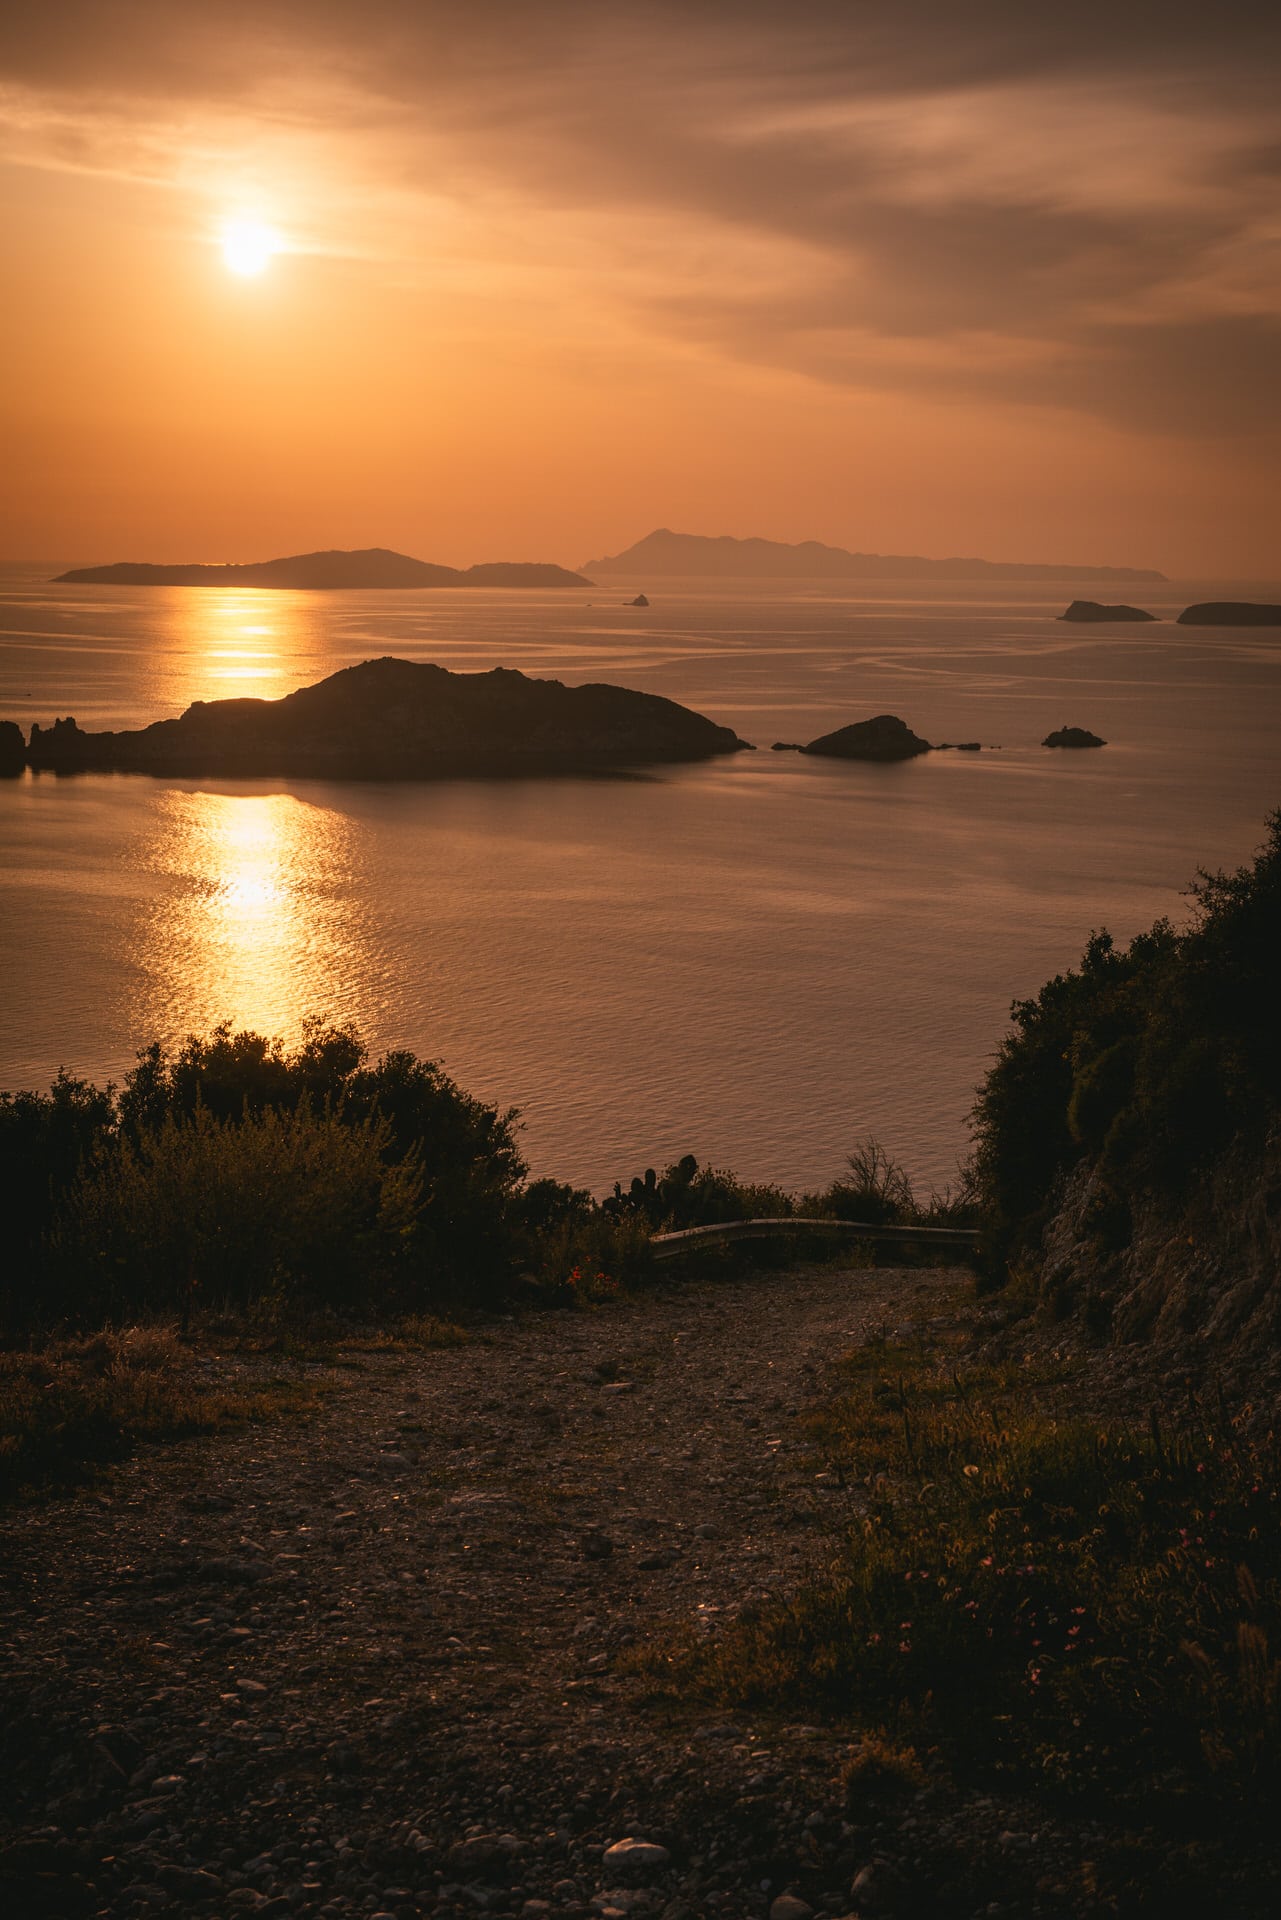 The stunning hues of sunset over the Corfu islands, a magical scene during their elopement.